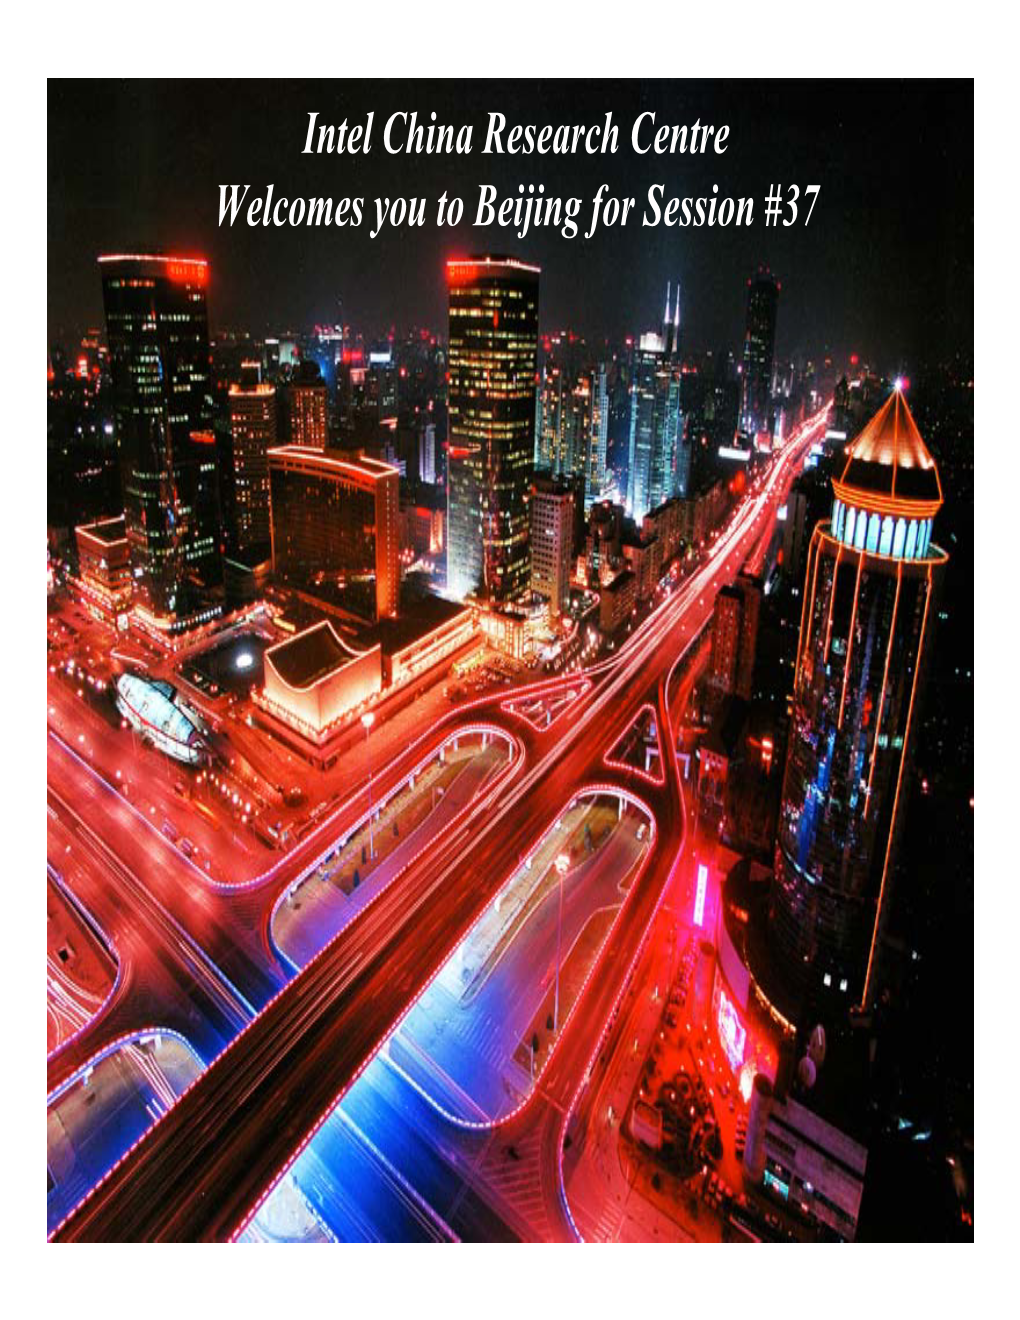 Intel China Research Centre Welcomes You to Beijing for Session #37 Why Go to China Again?